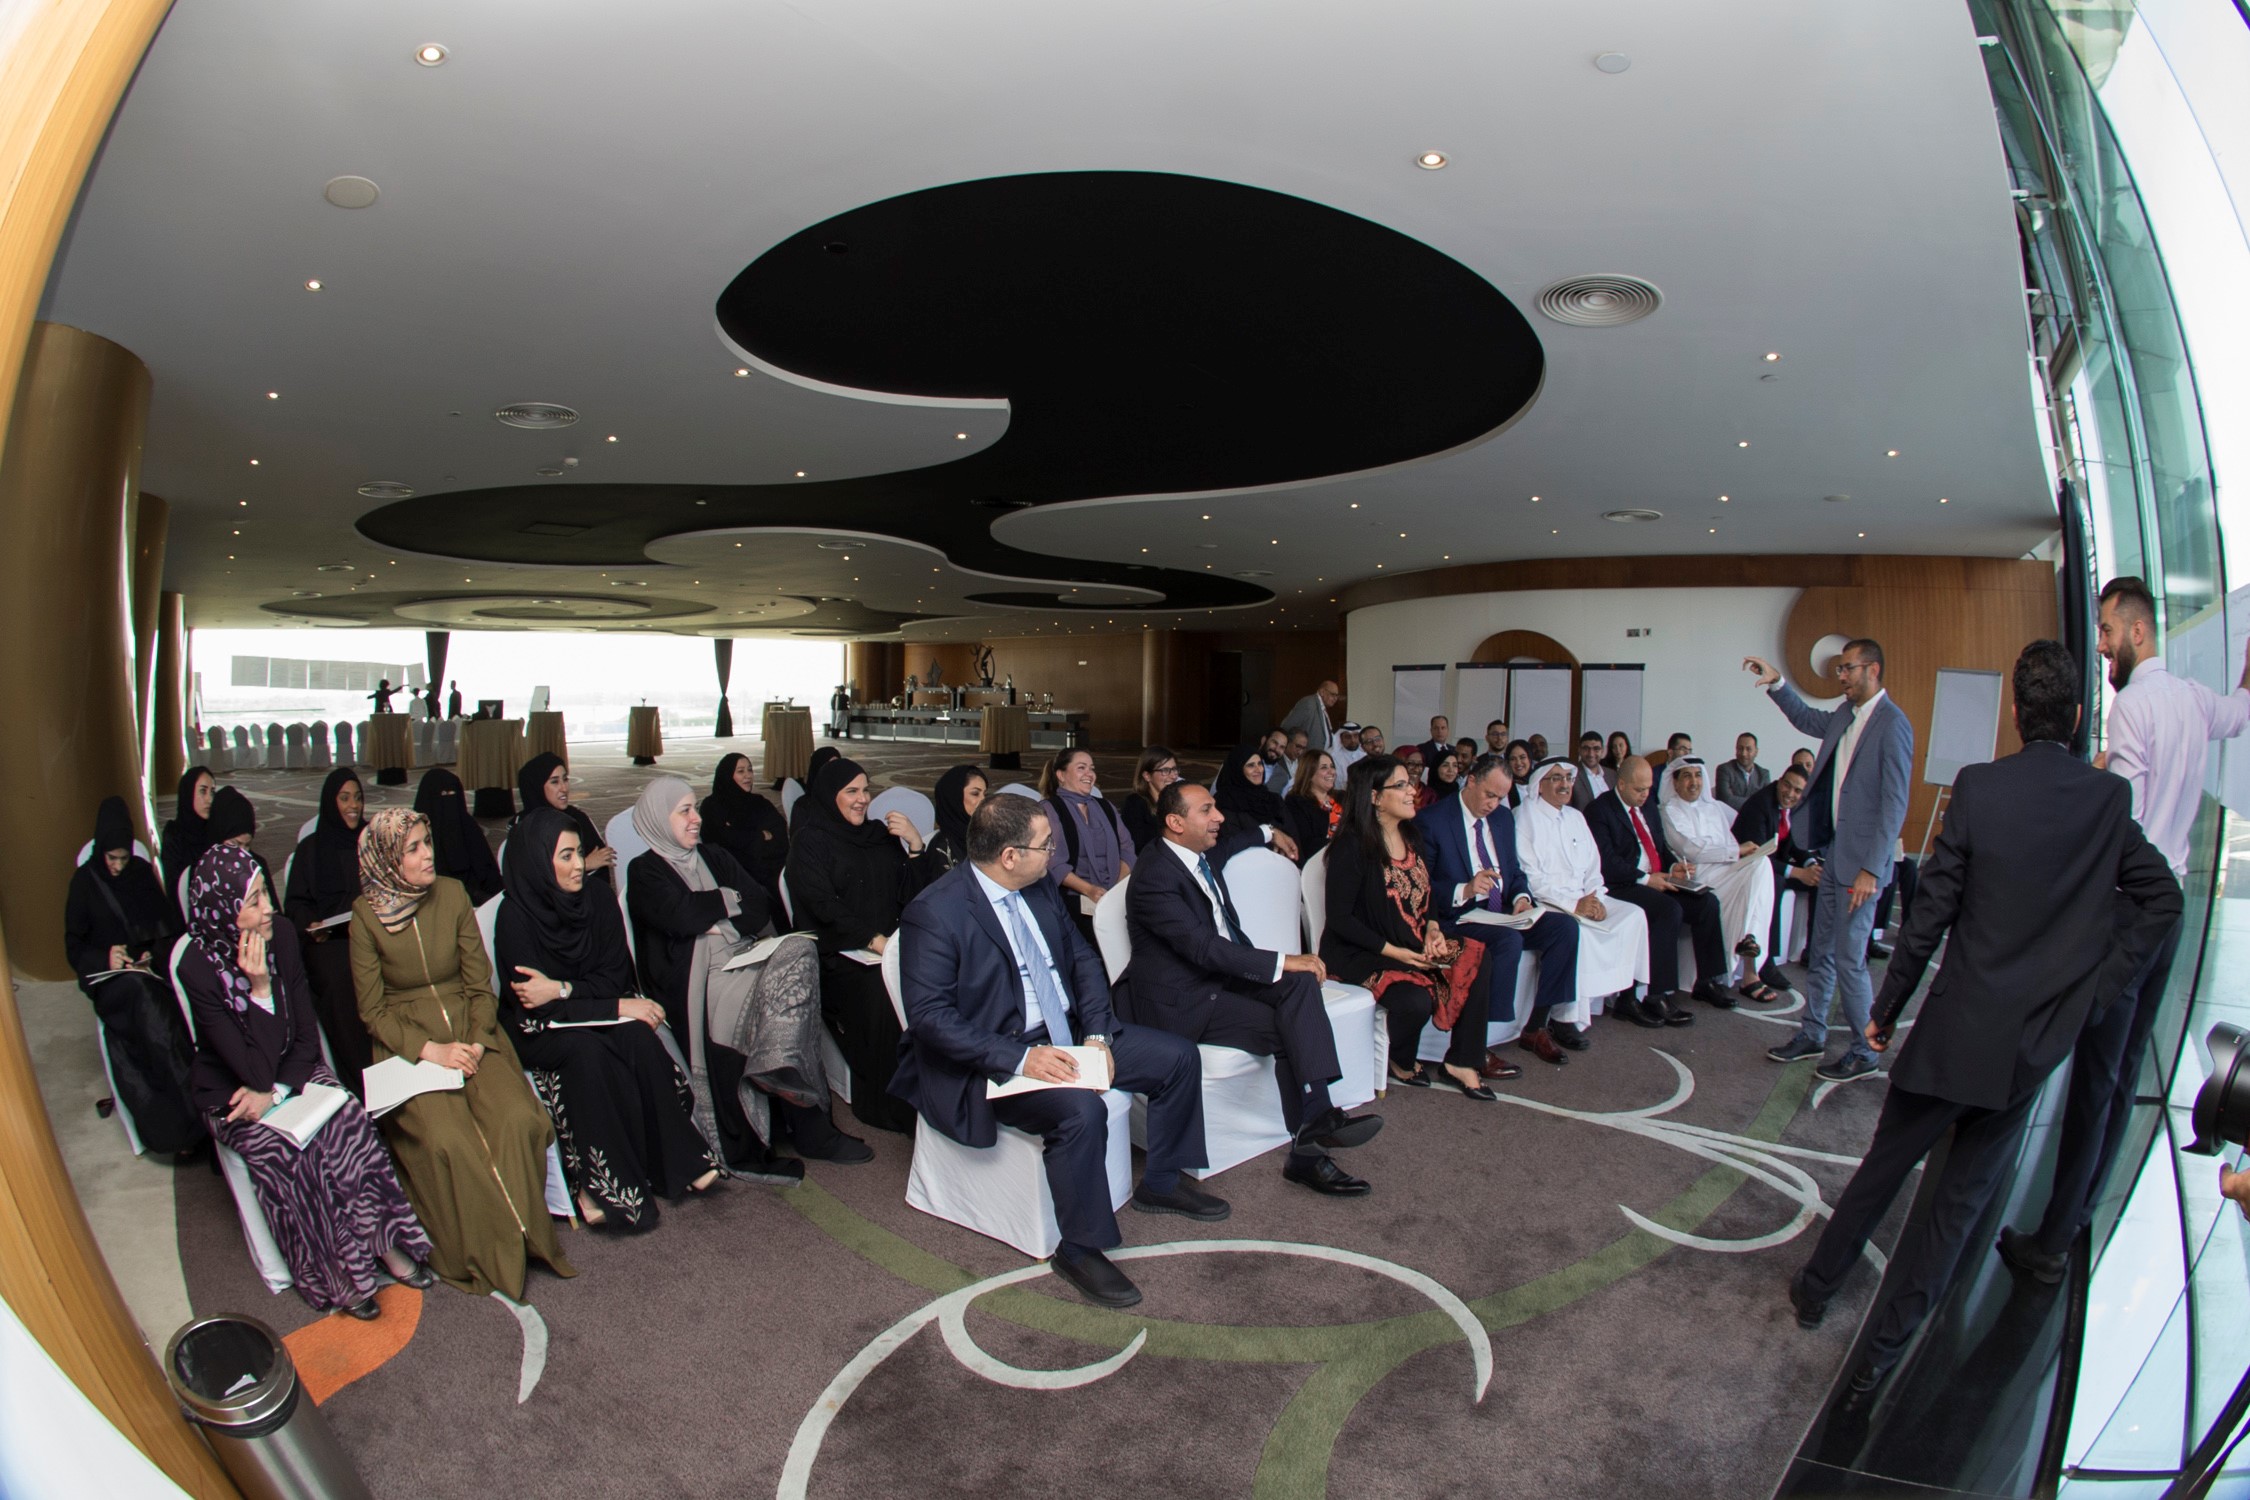 The Government of Dubai Legal Affairs Department Held Its “X10” Retreat to Discuss Innovation and Forward Thinking